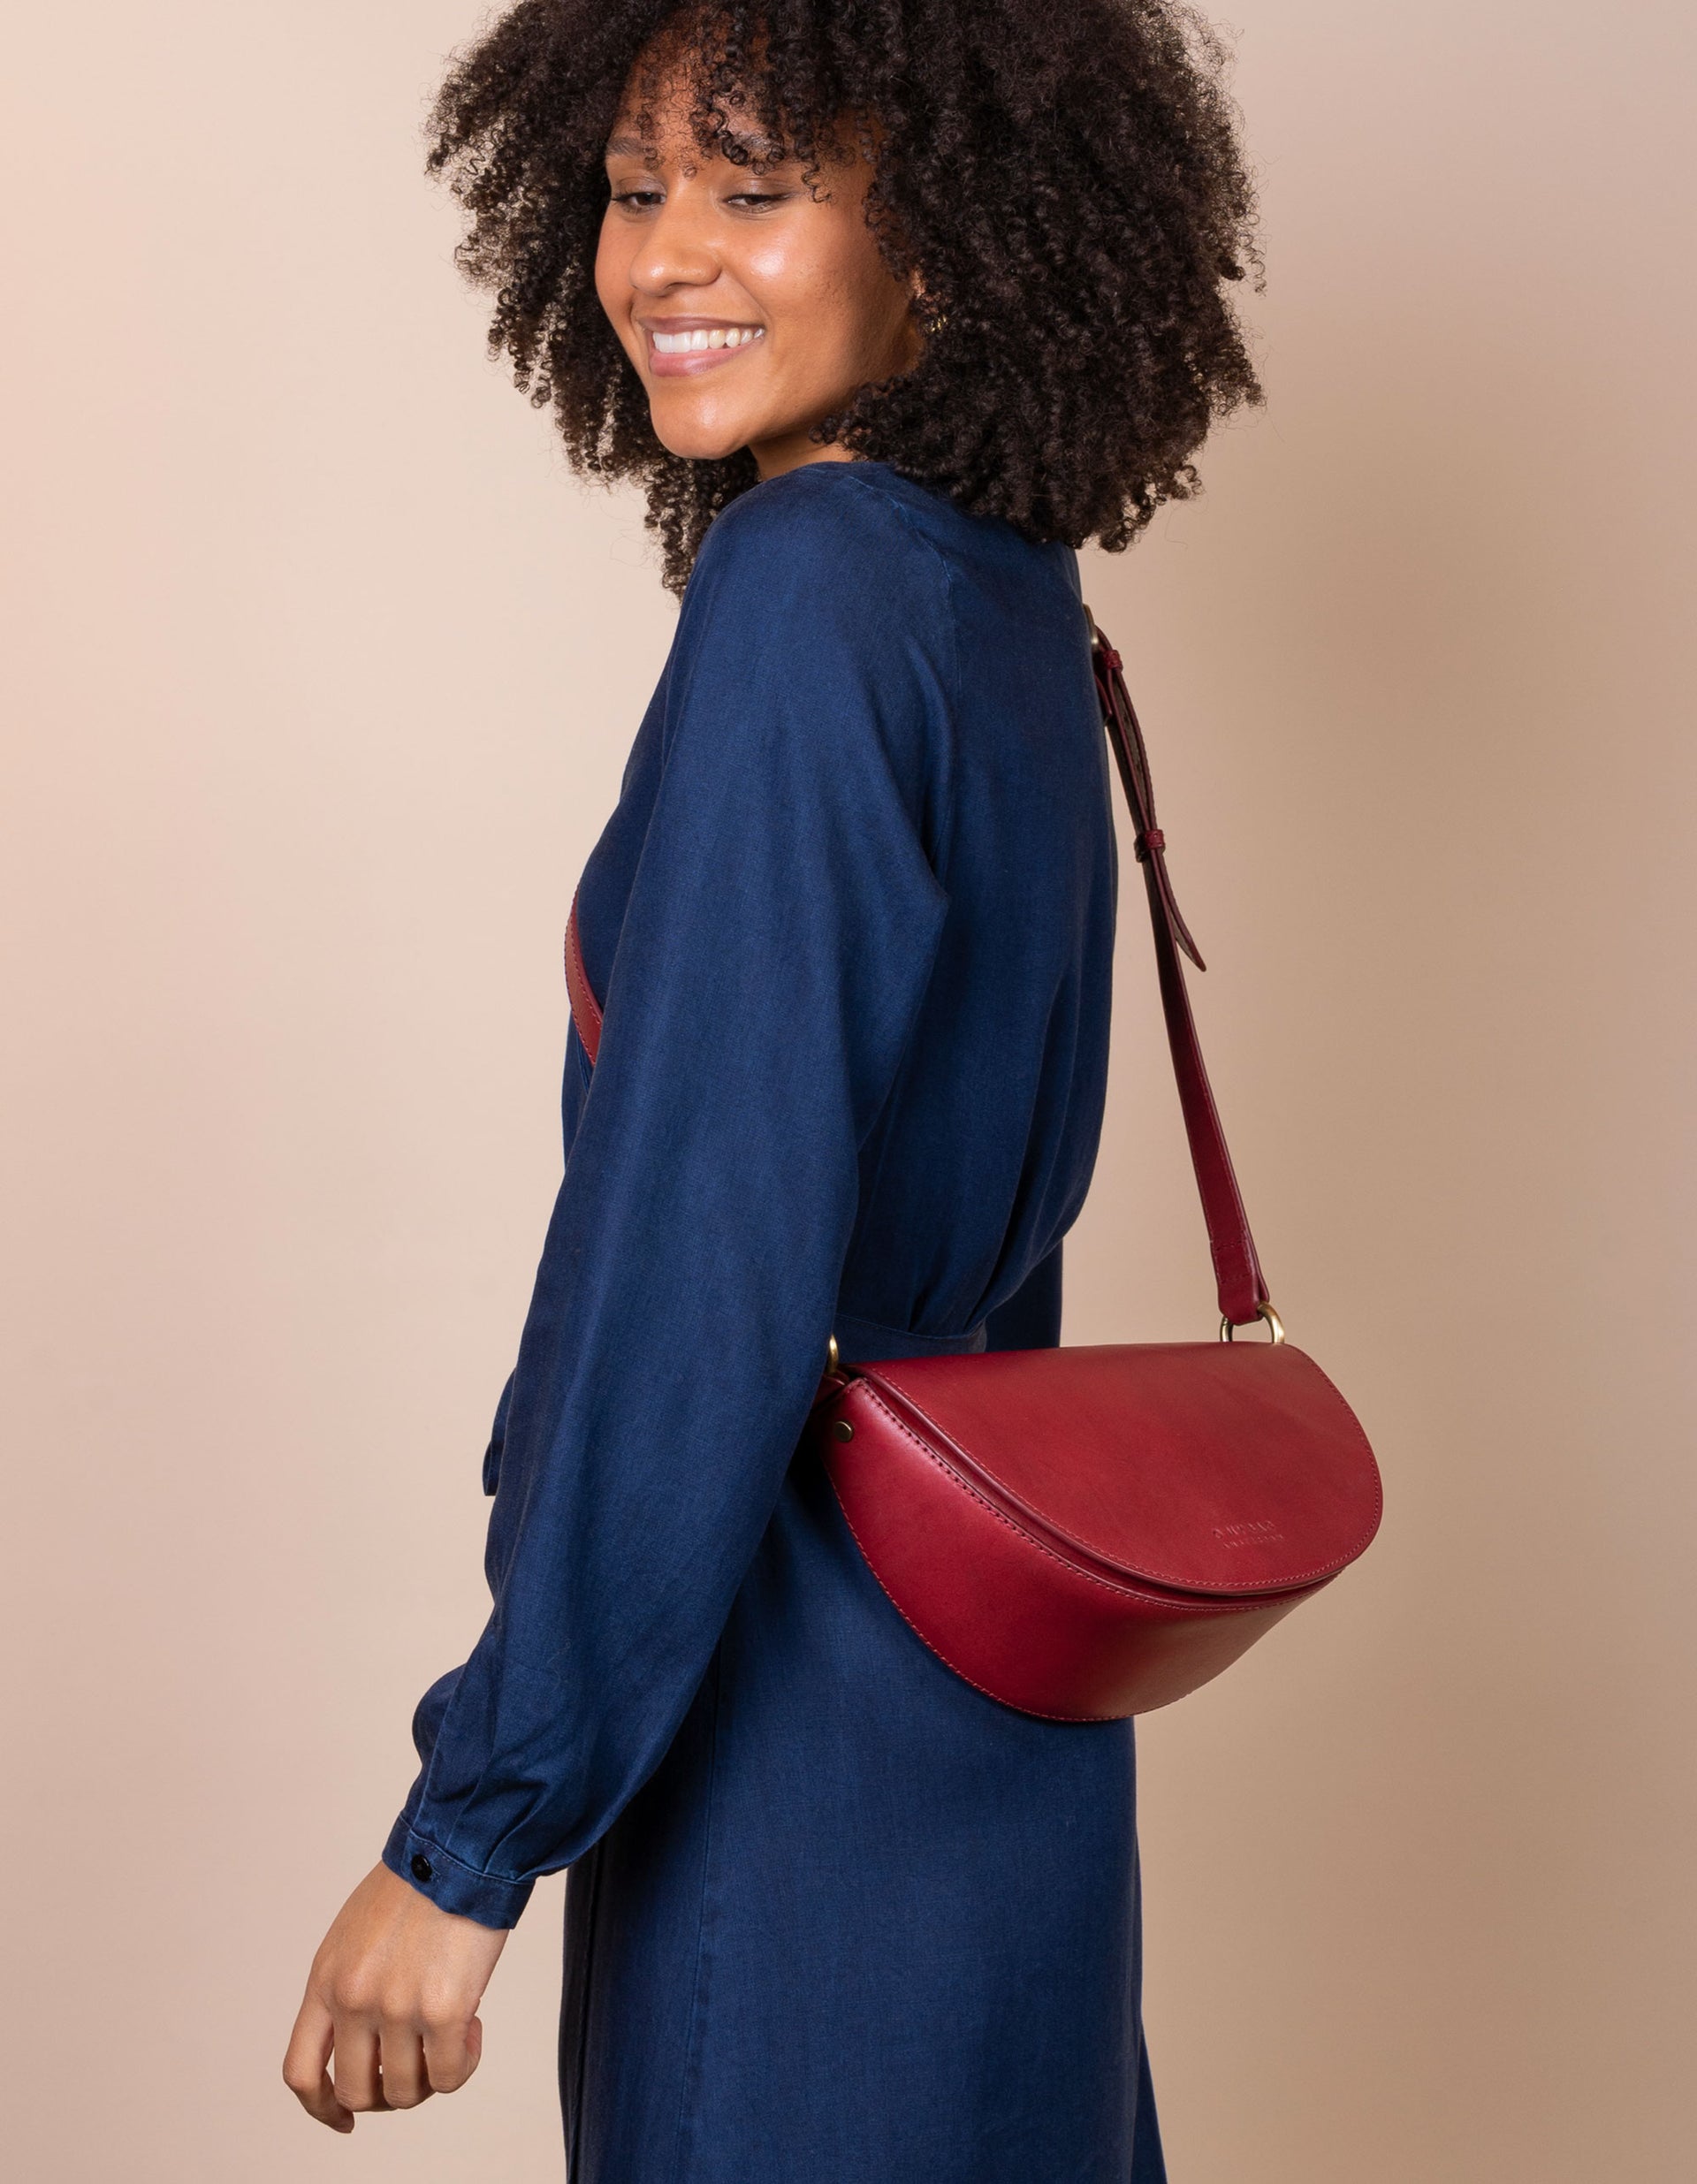 Laura Bag in Ruby Classic Leather ft. Adjustable leather strap - Female model product image